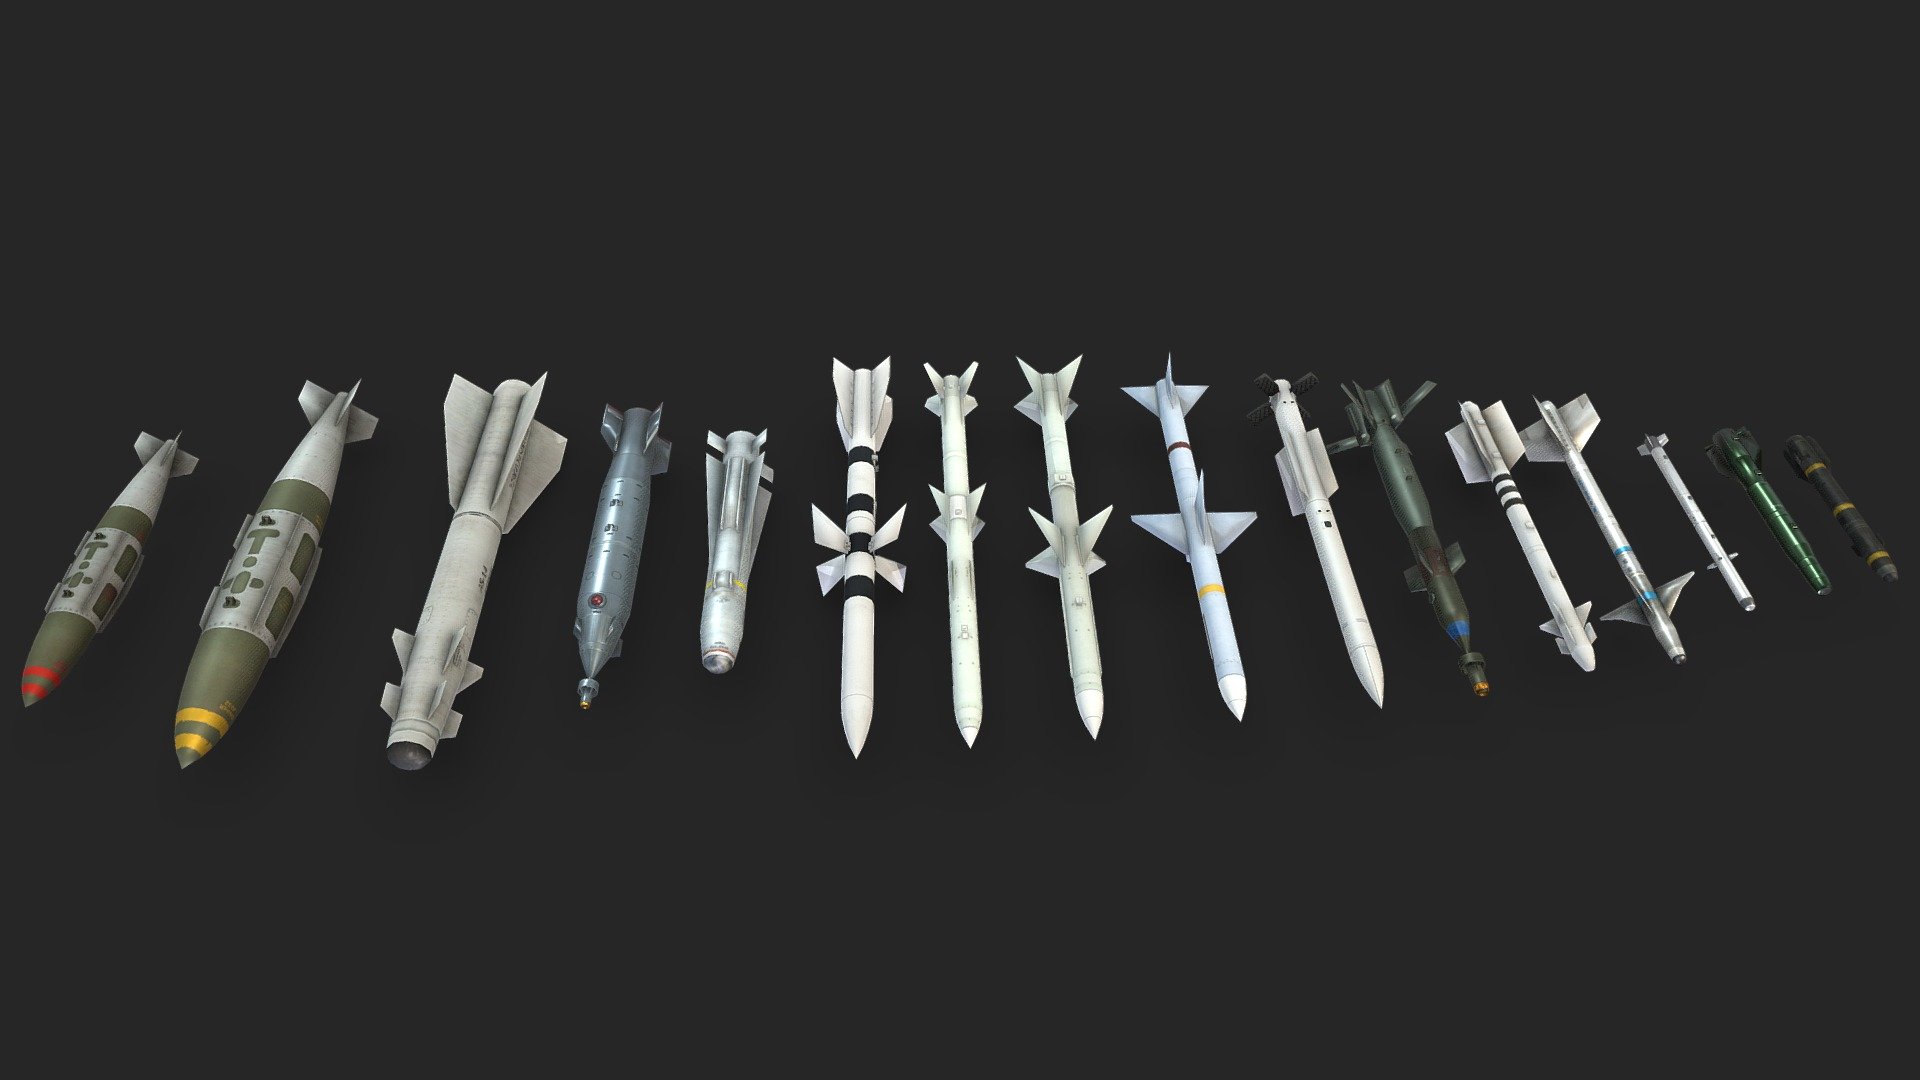 This collection features following Missiles and Bombs:




AGM-65 Maverick

AGM-114 Hellfire

AIM-7 Sparrow

AIM-9 Sidewinder

GBU-12 Paveway II

HJ-10

JDAM (2 Versions)

KAB-500L

Kh-29

PL-11 (2 Versions)

R-27 (2 Version)

R-77

TY-90

Have fun with them :) - Missile & Bomb Collection - Fighter Jets - Free - Download Free 3D model by bohmerang 3d model